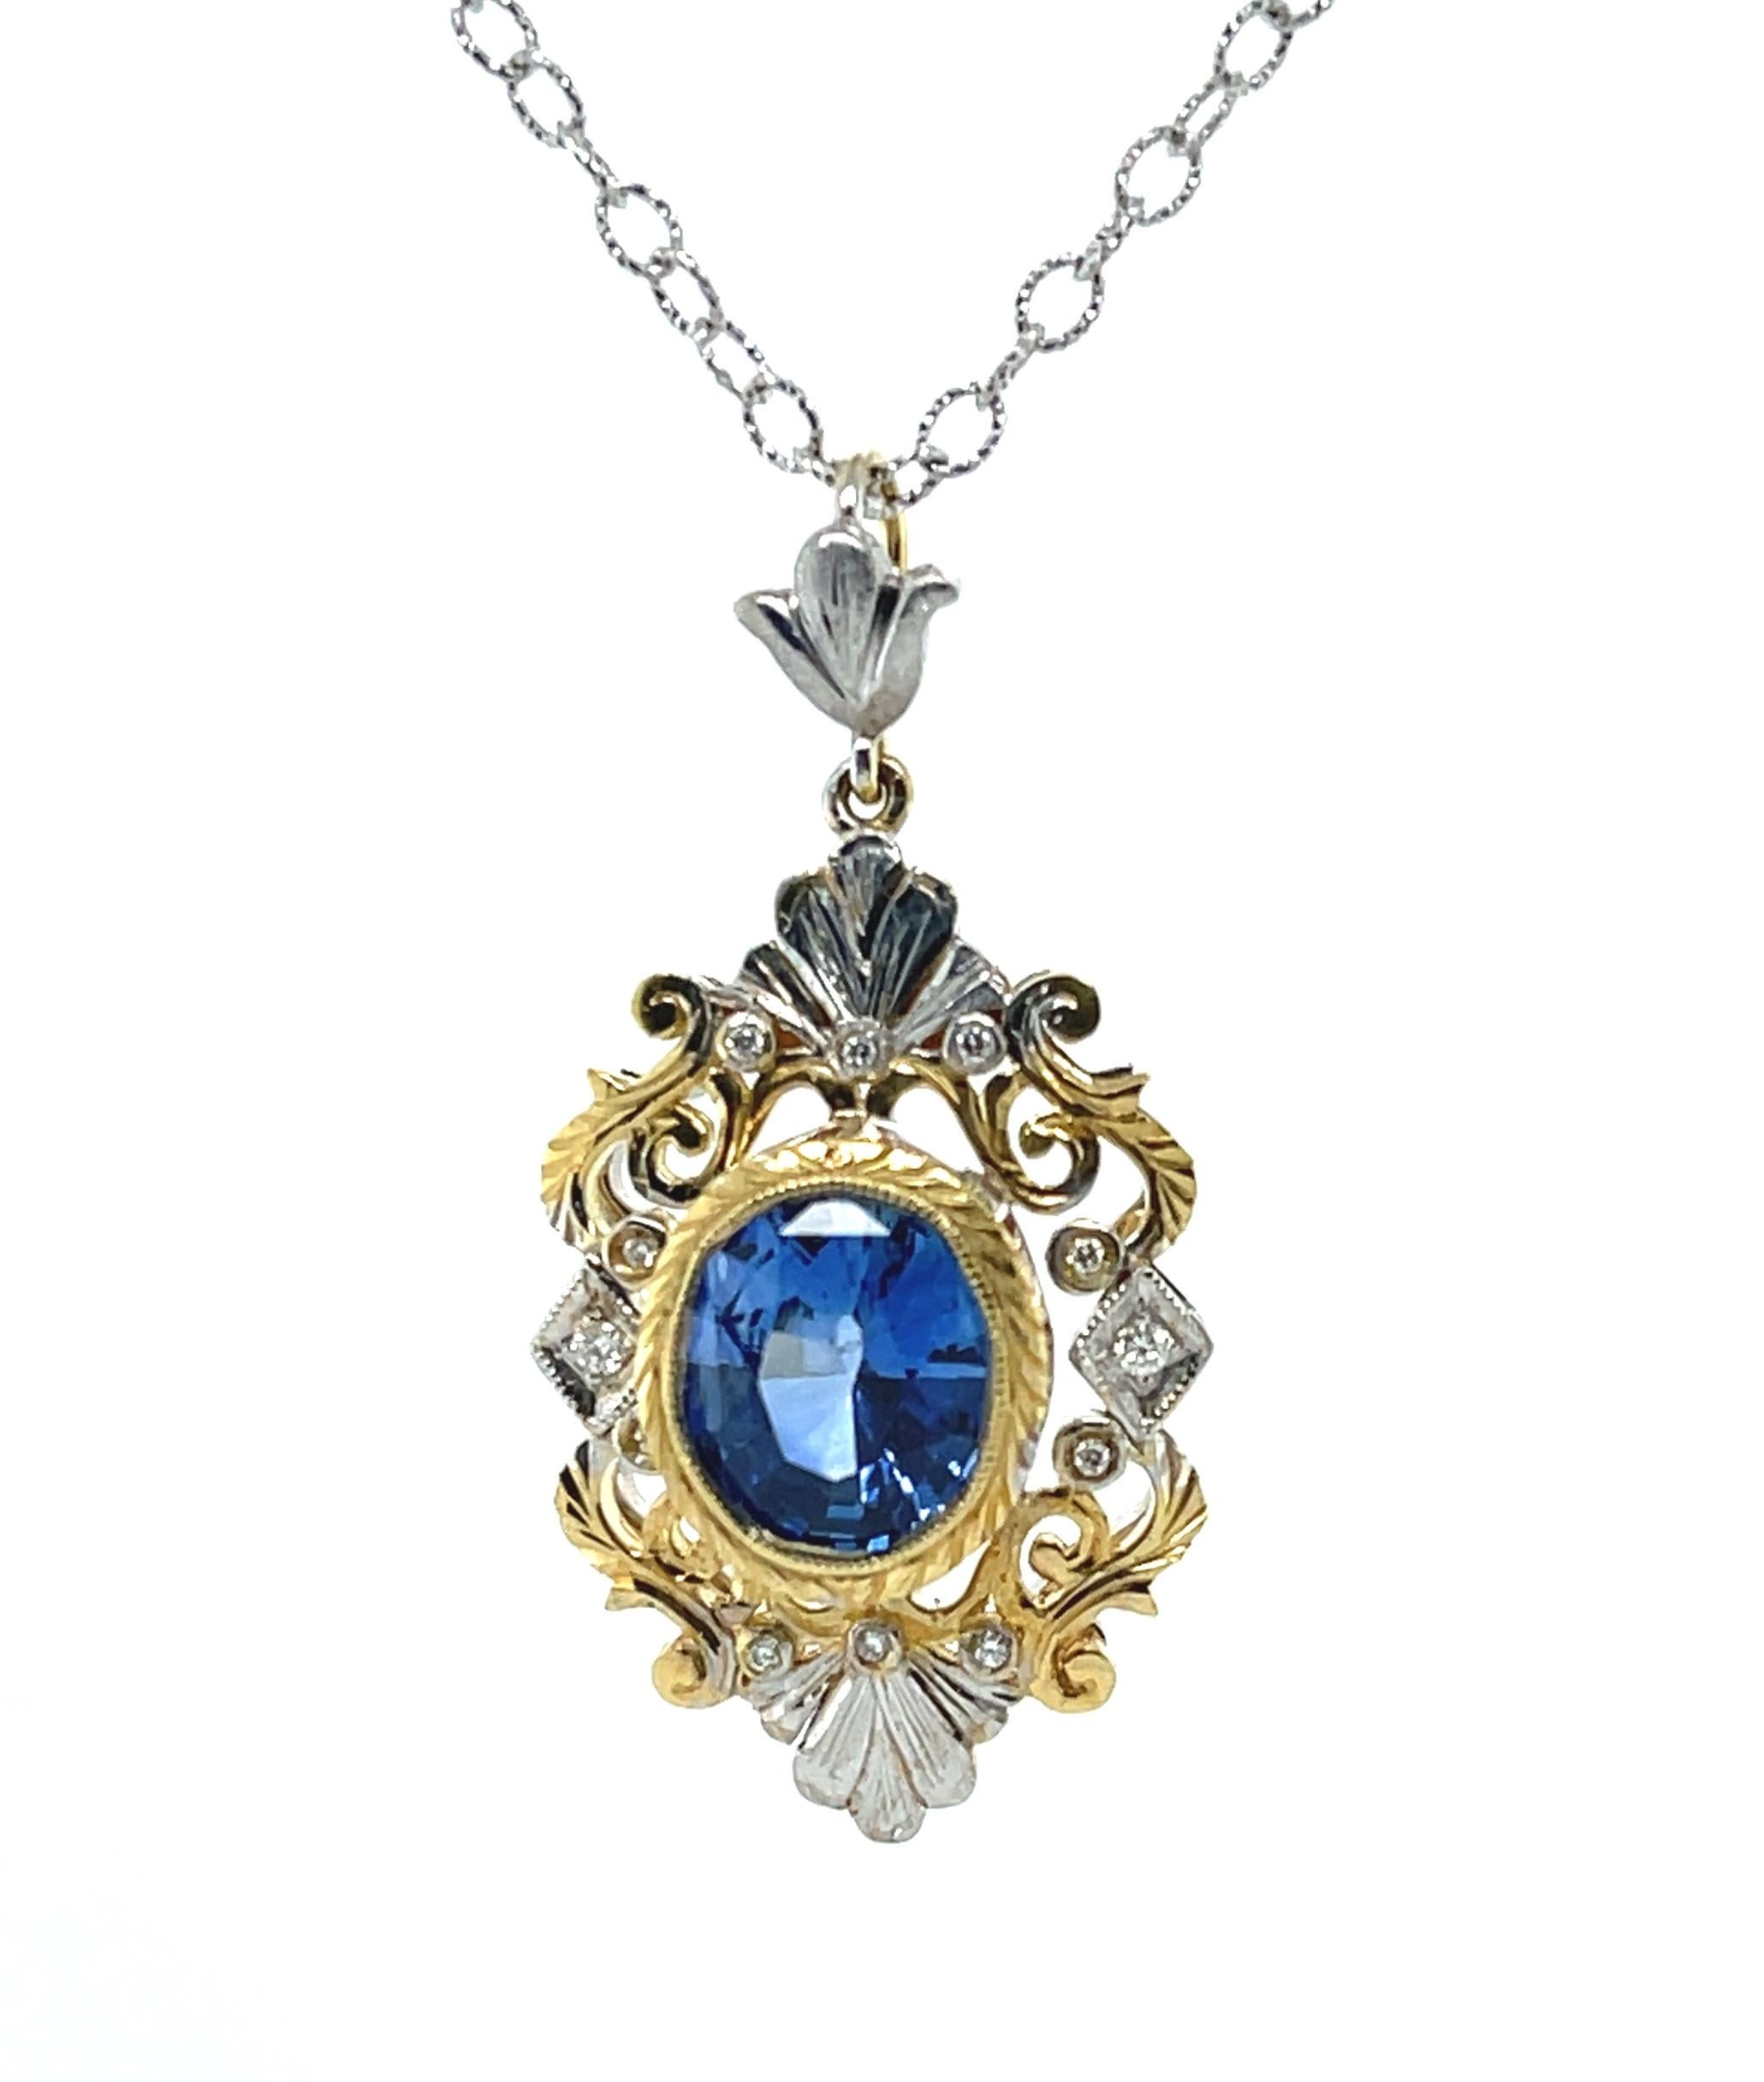 Women's Cornflower Blue Sapphire and Diamond Victorian Style Necklace in 18k Yellow Gold